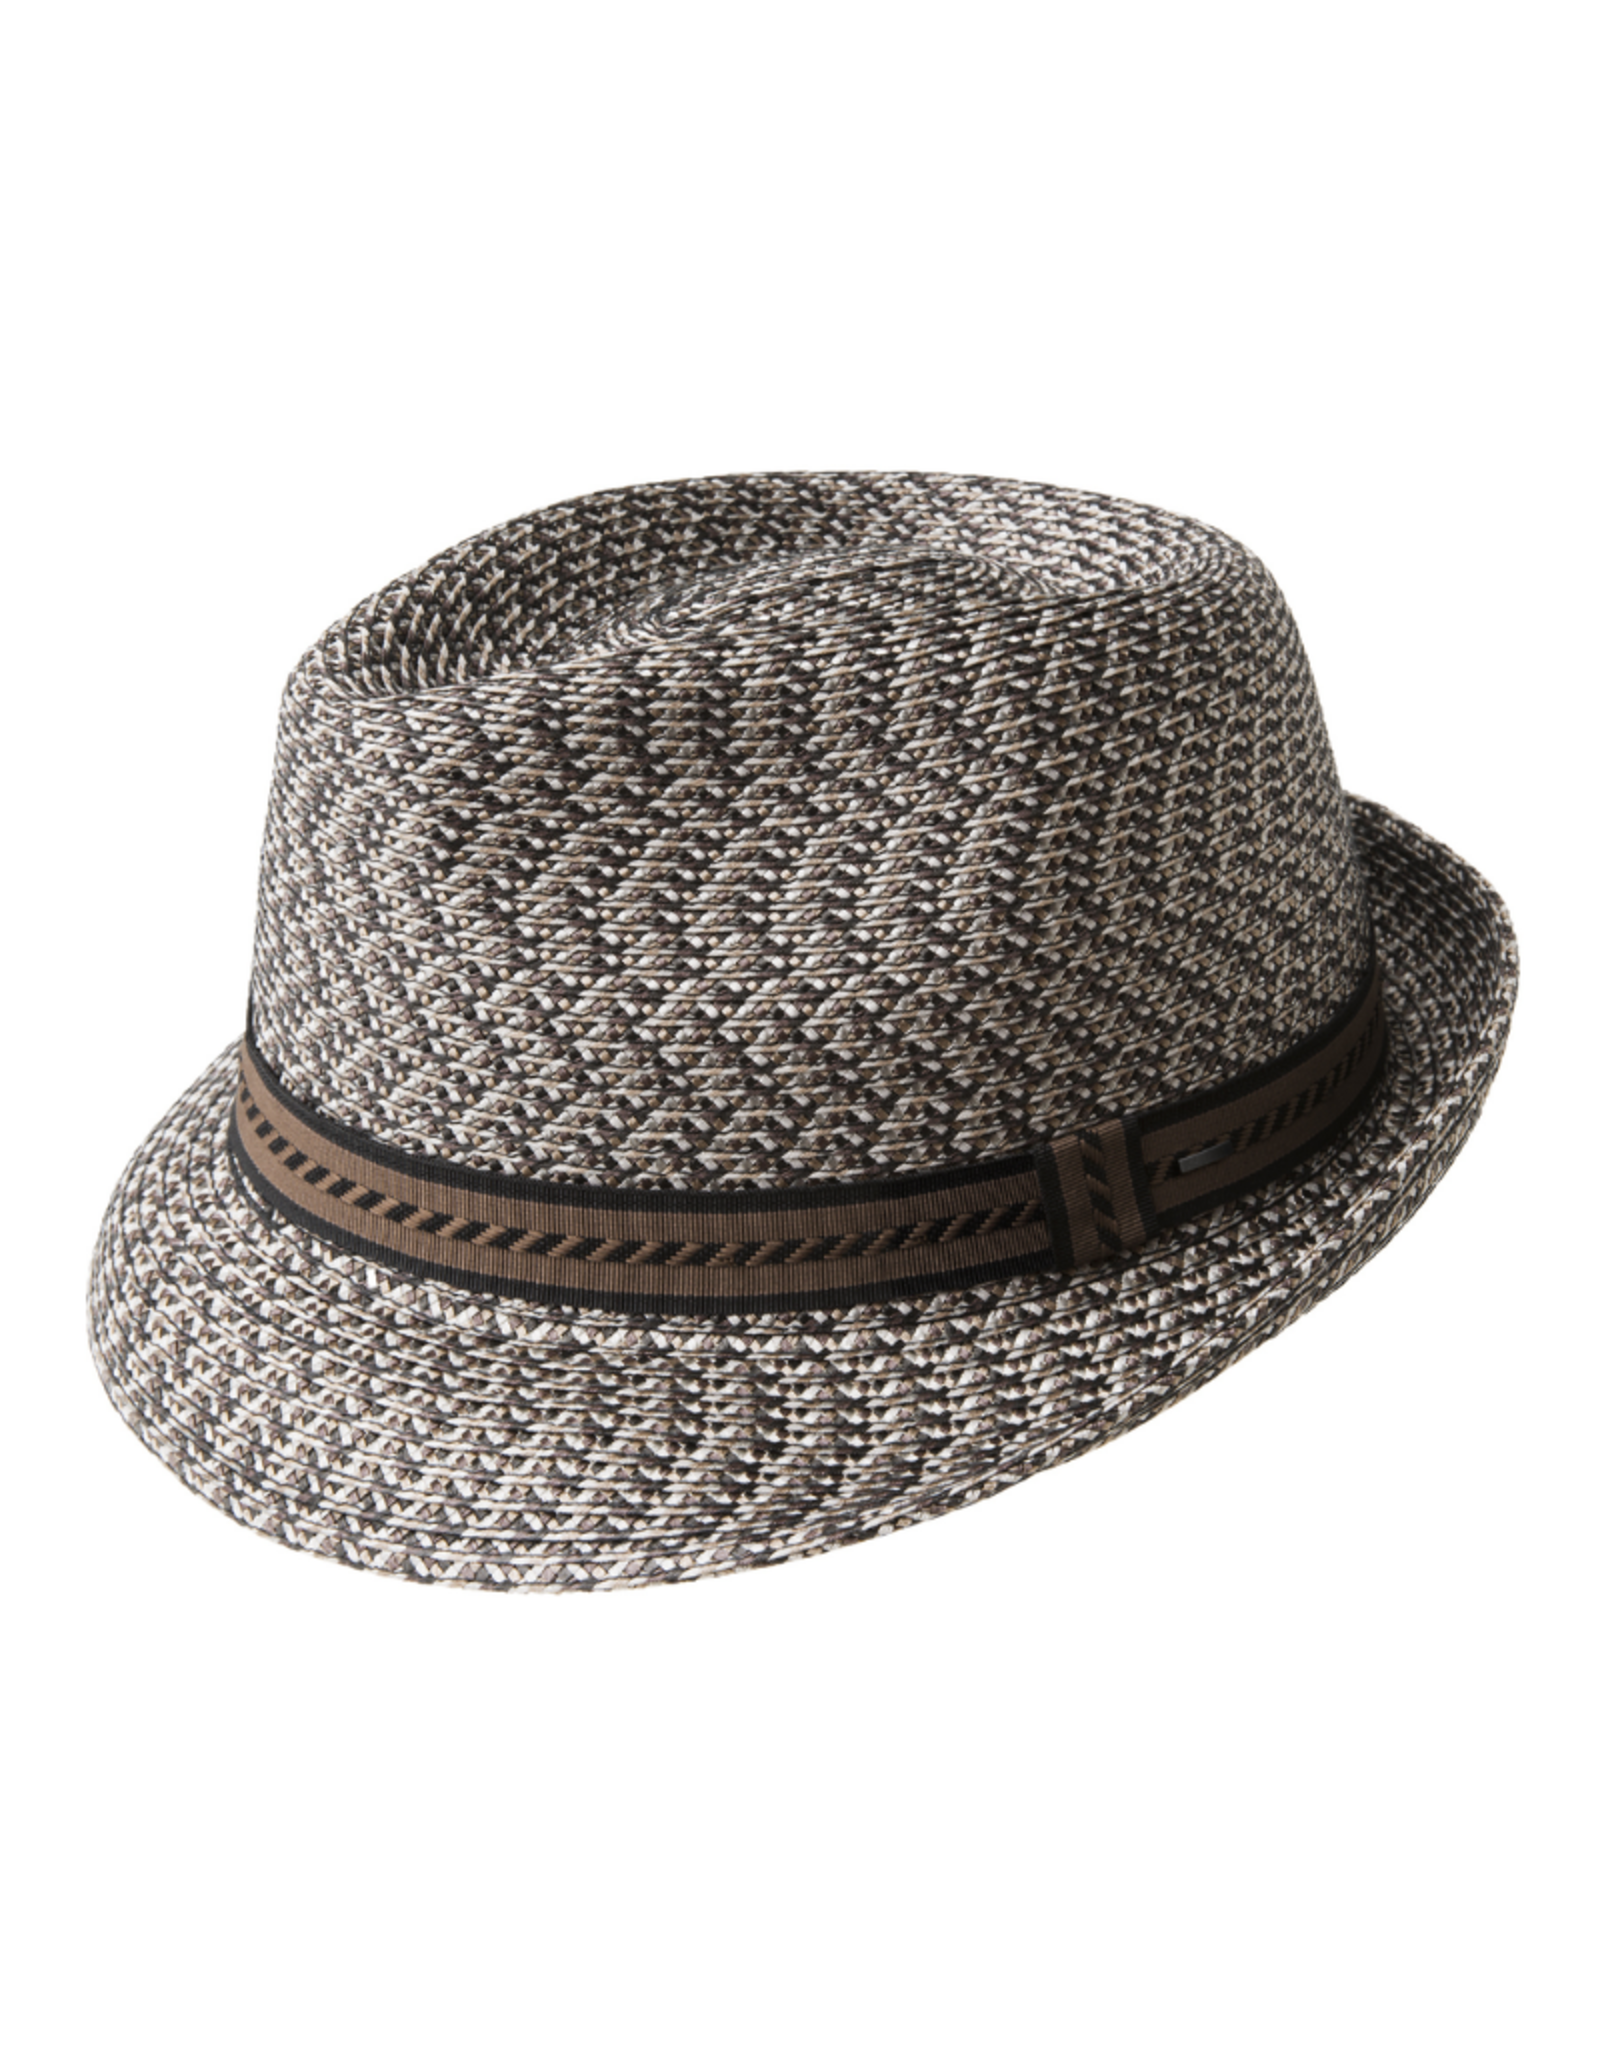 Bailey 1922 HAT-TRILBY "MANNES"